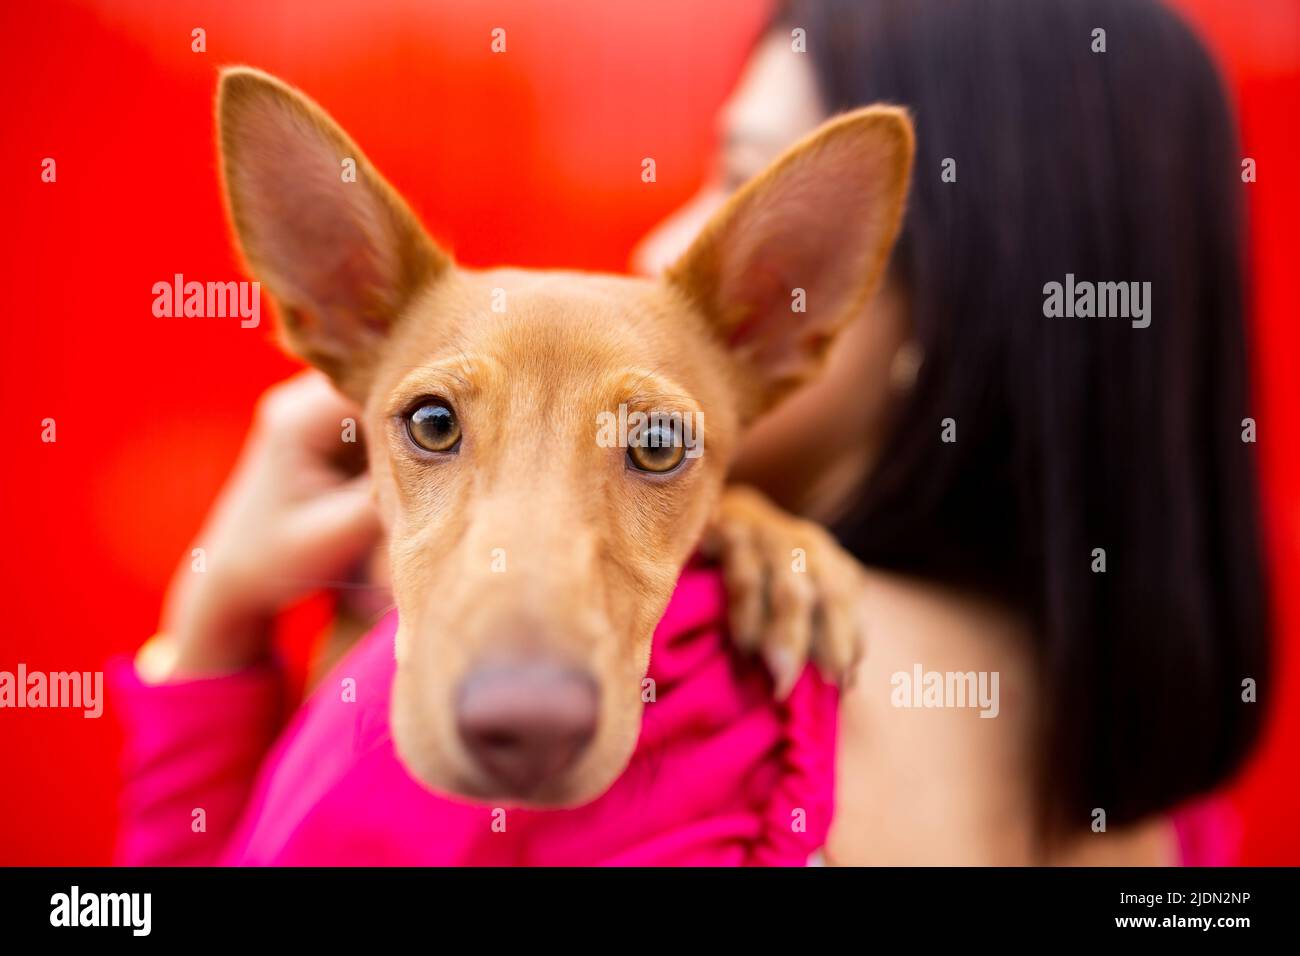 Young brunette woman holding a young brown dog on her arms against a red background Stock Photo